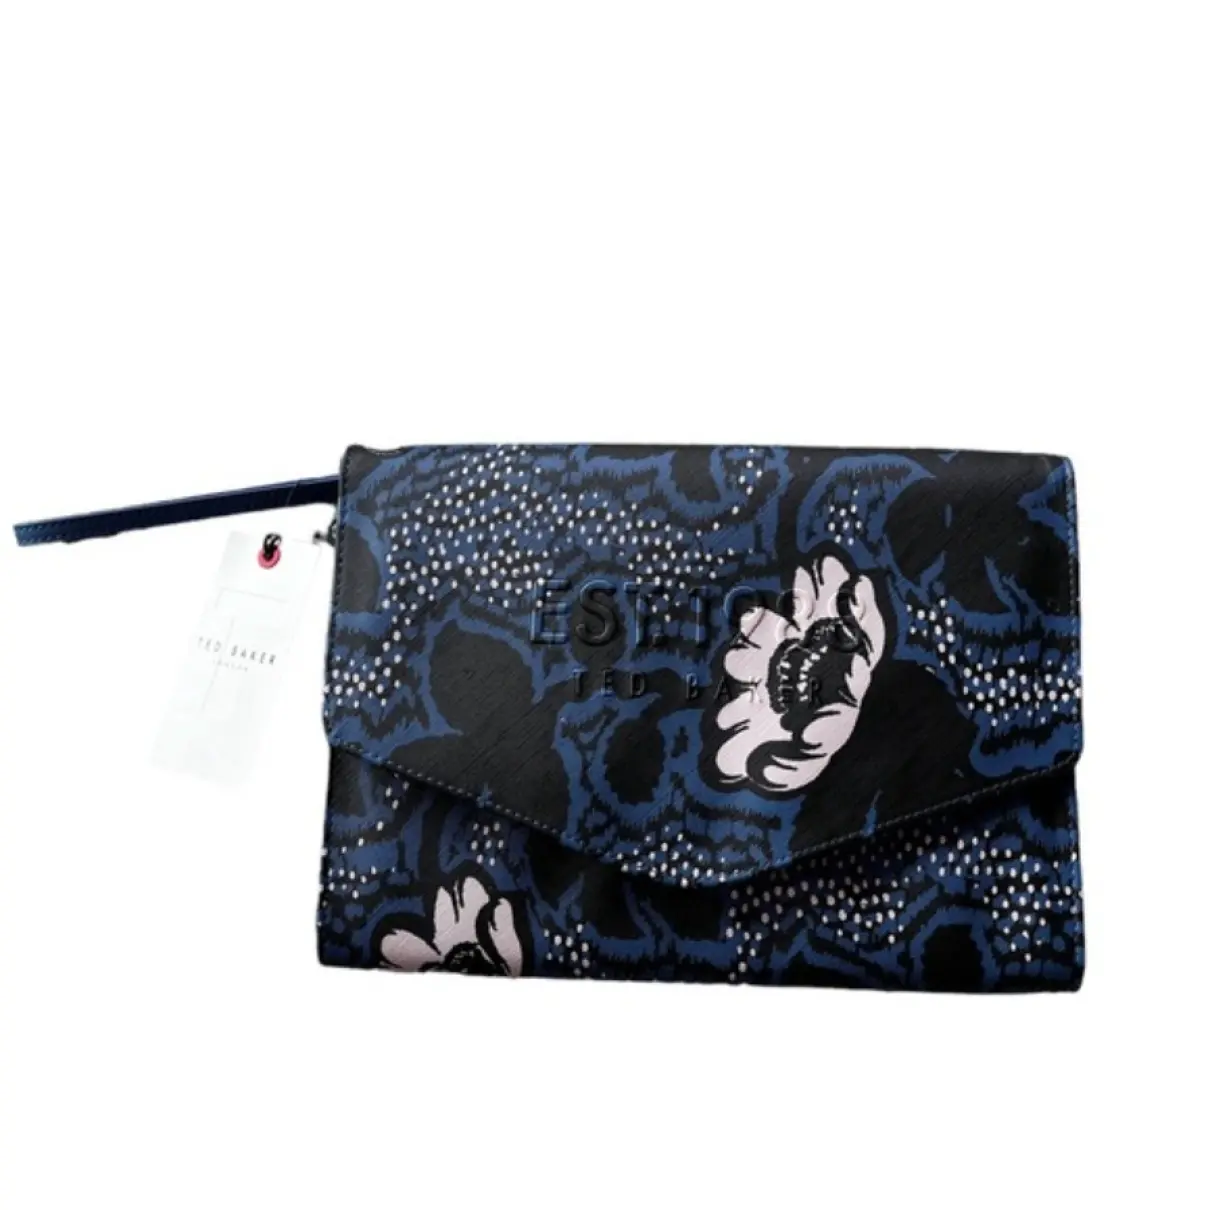 Leather clutch bag Ted Baker